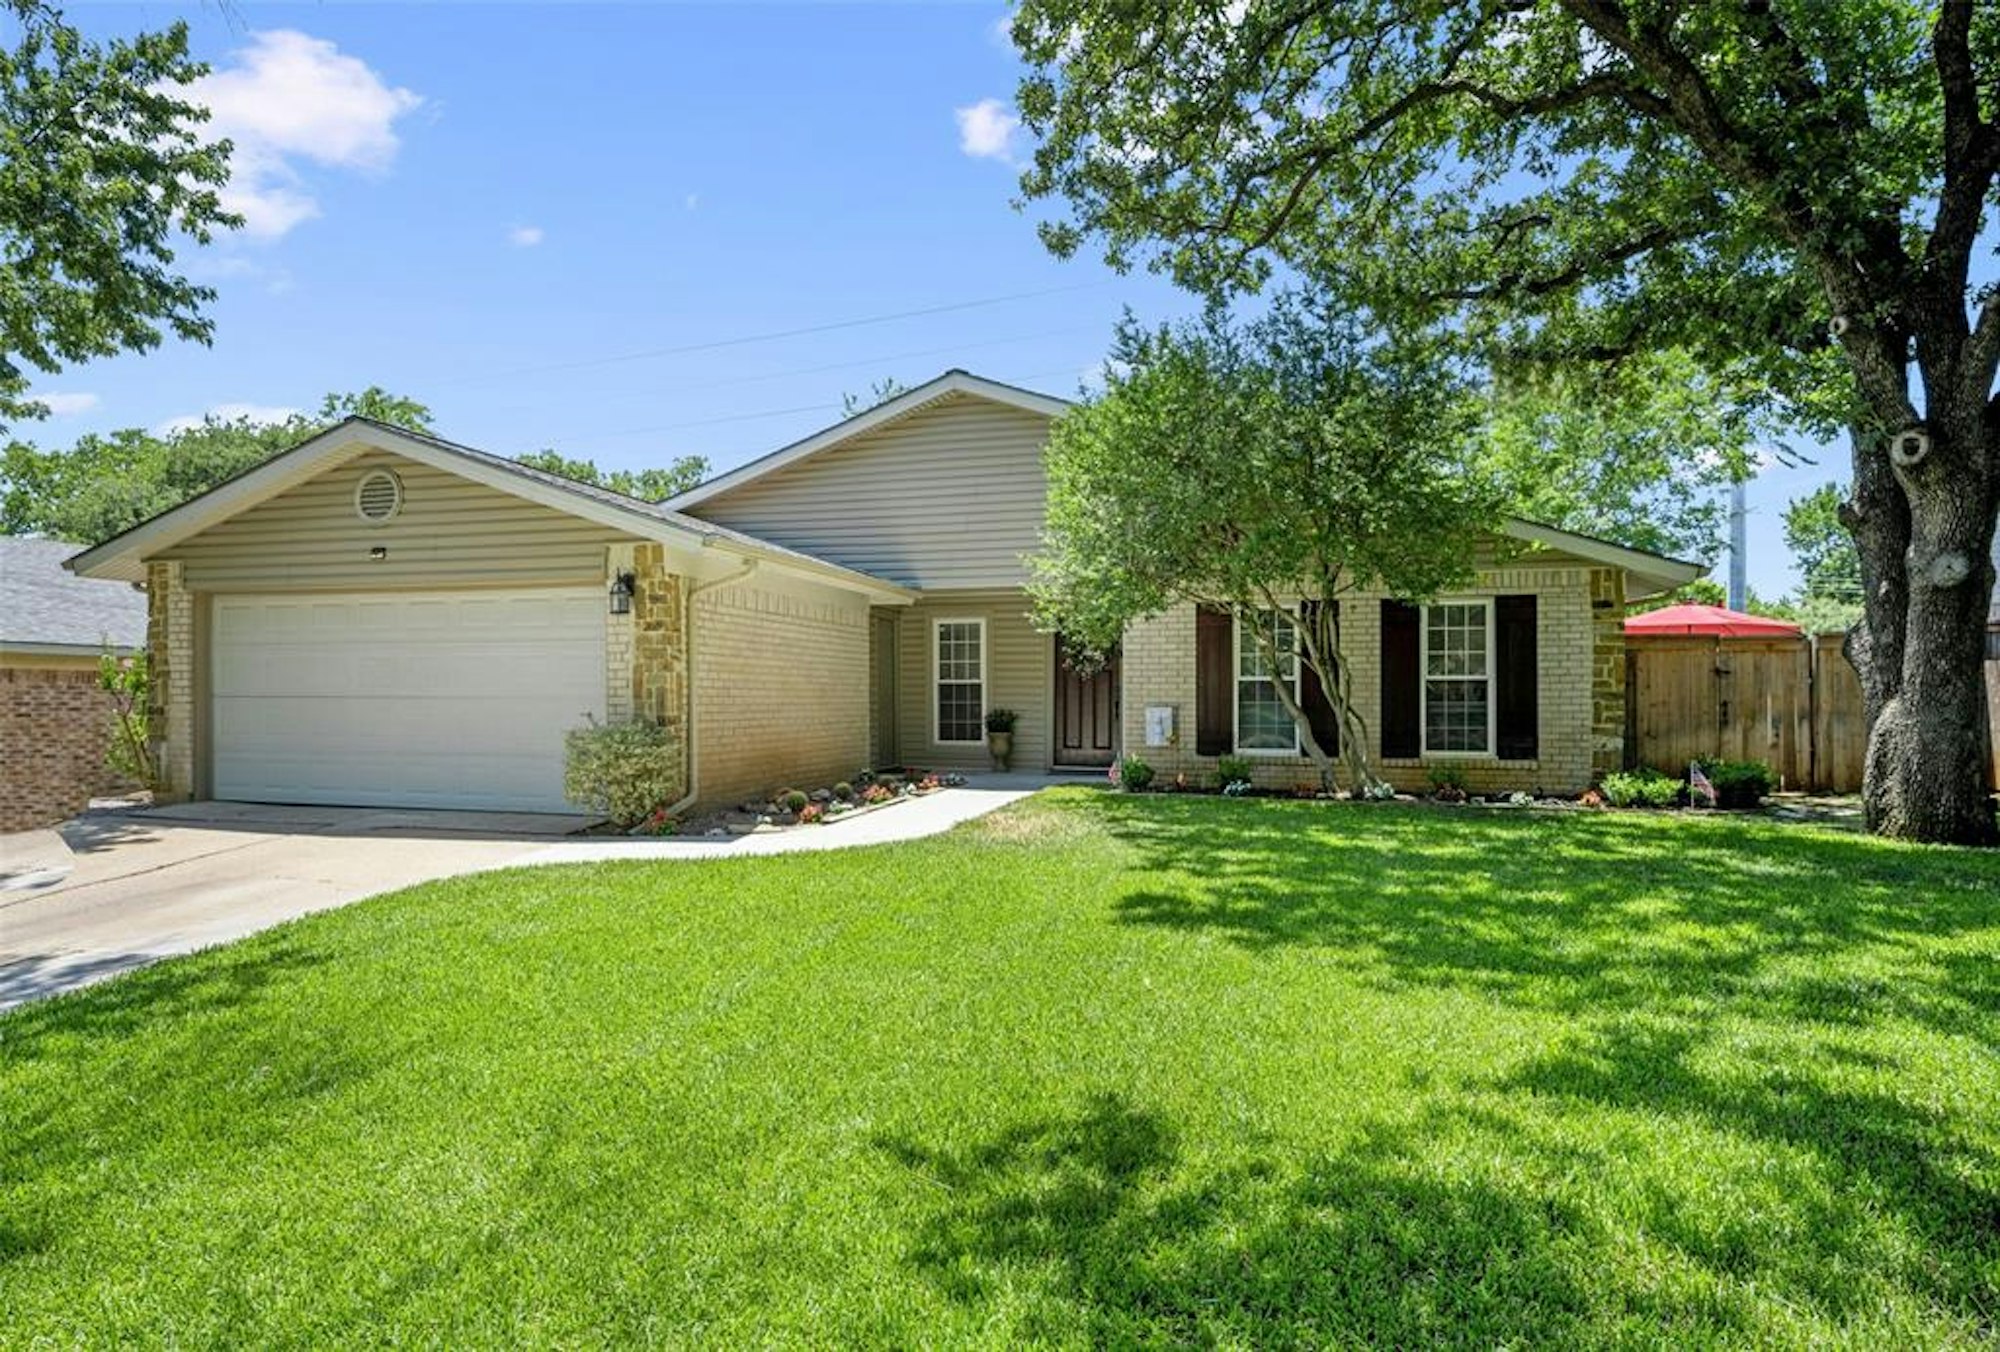 Photo 1 of 27 - 3109 Story Ln, Bedford, TX 76021